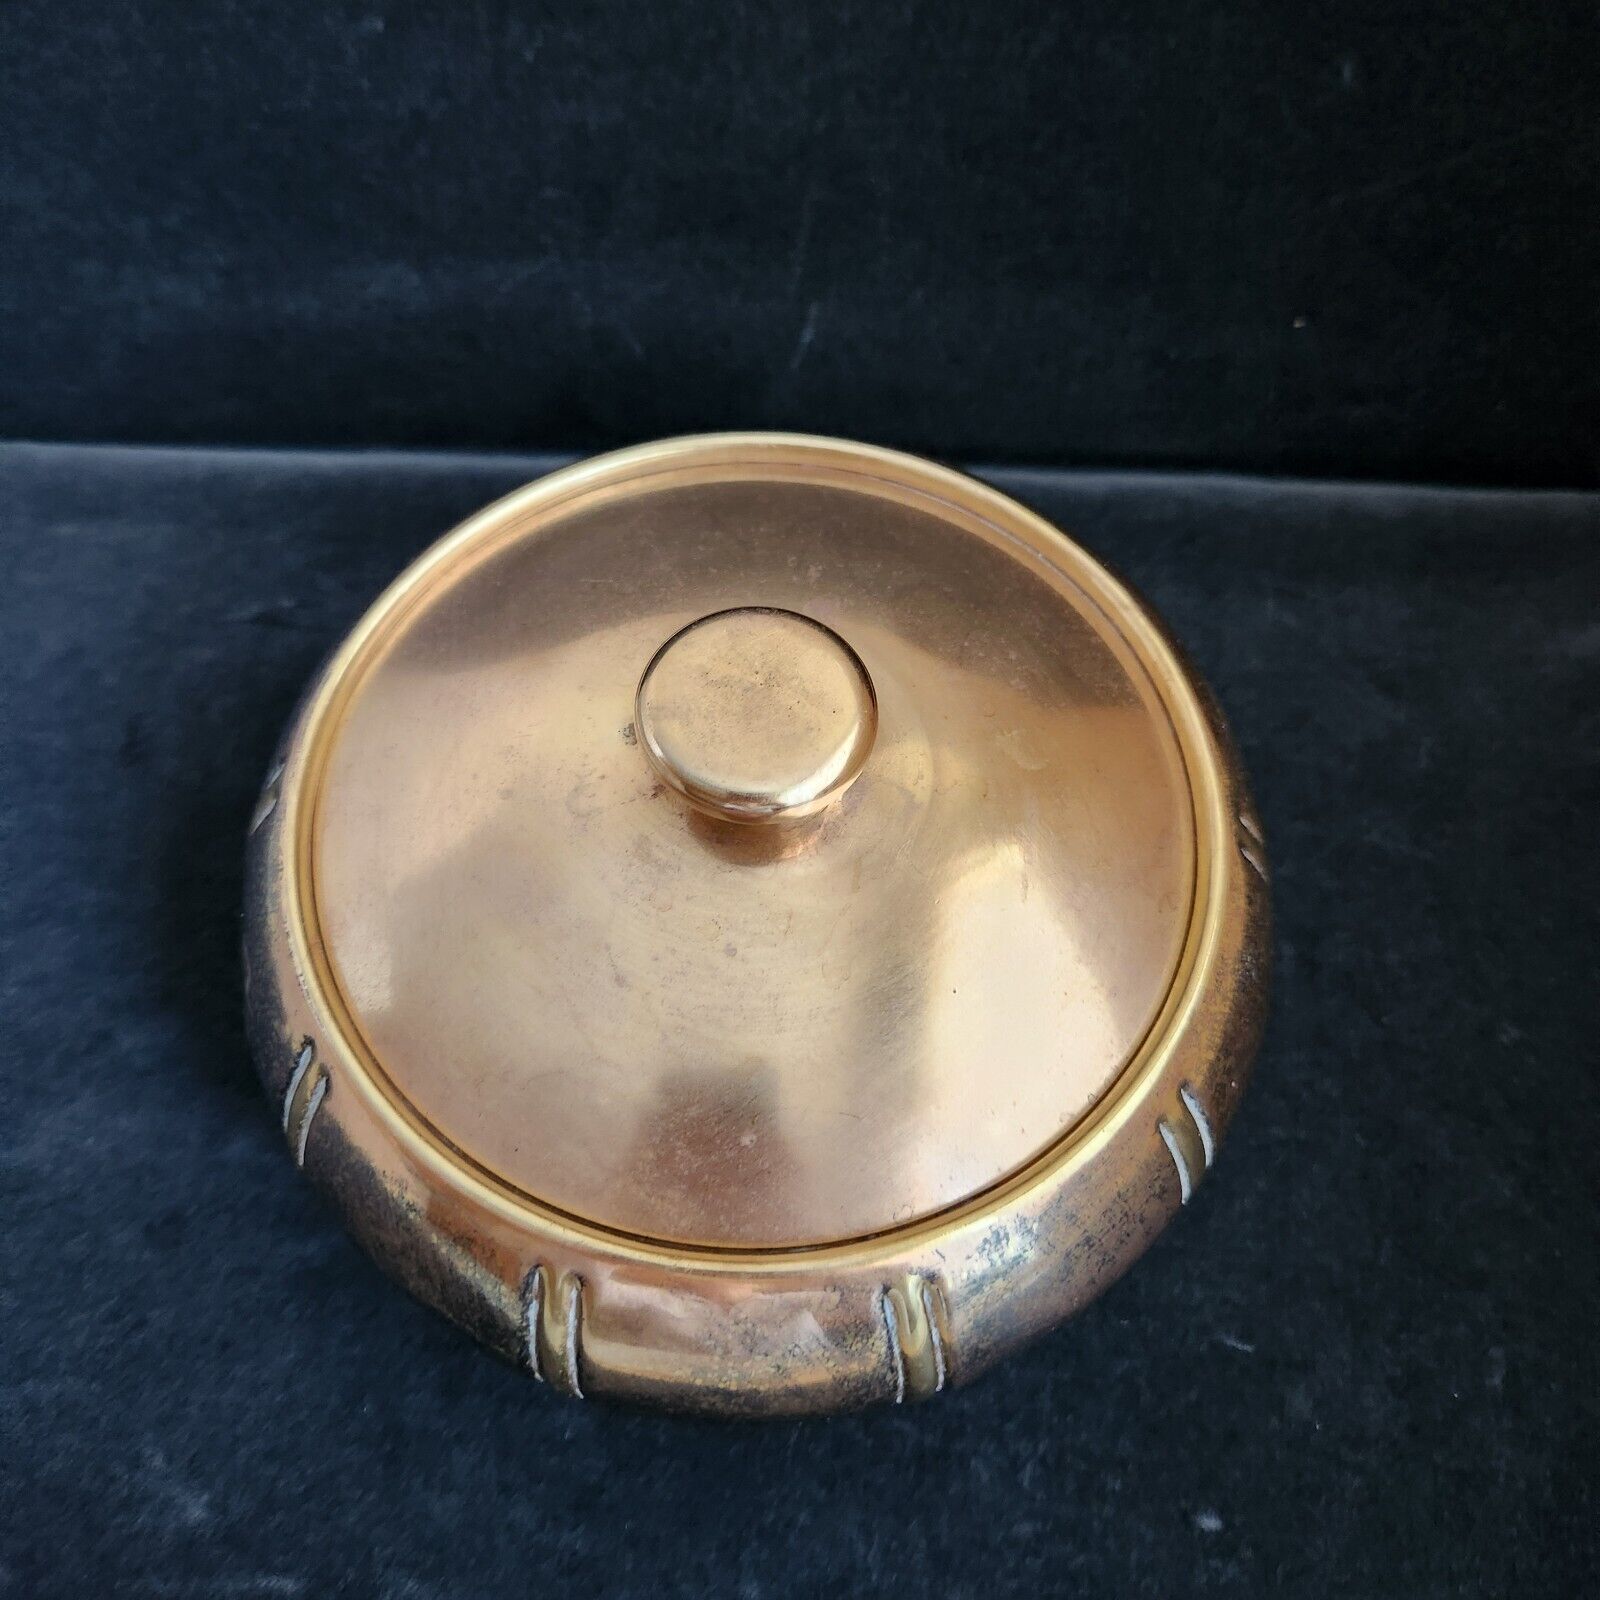 Beautiful Vintage Solid Brass Bowl with Lid from Korea, 1950s/60s, Bird Design